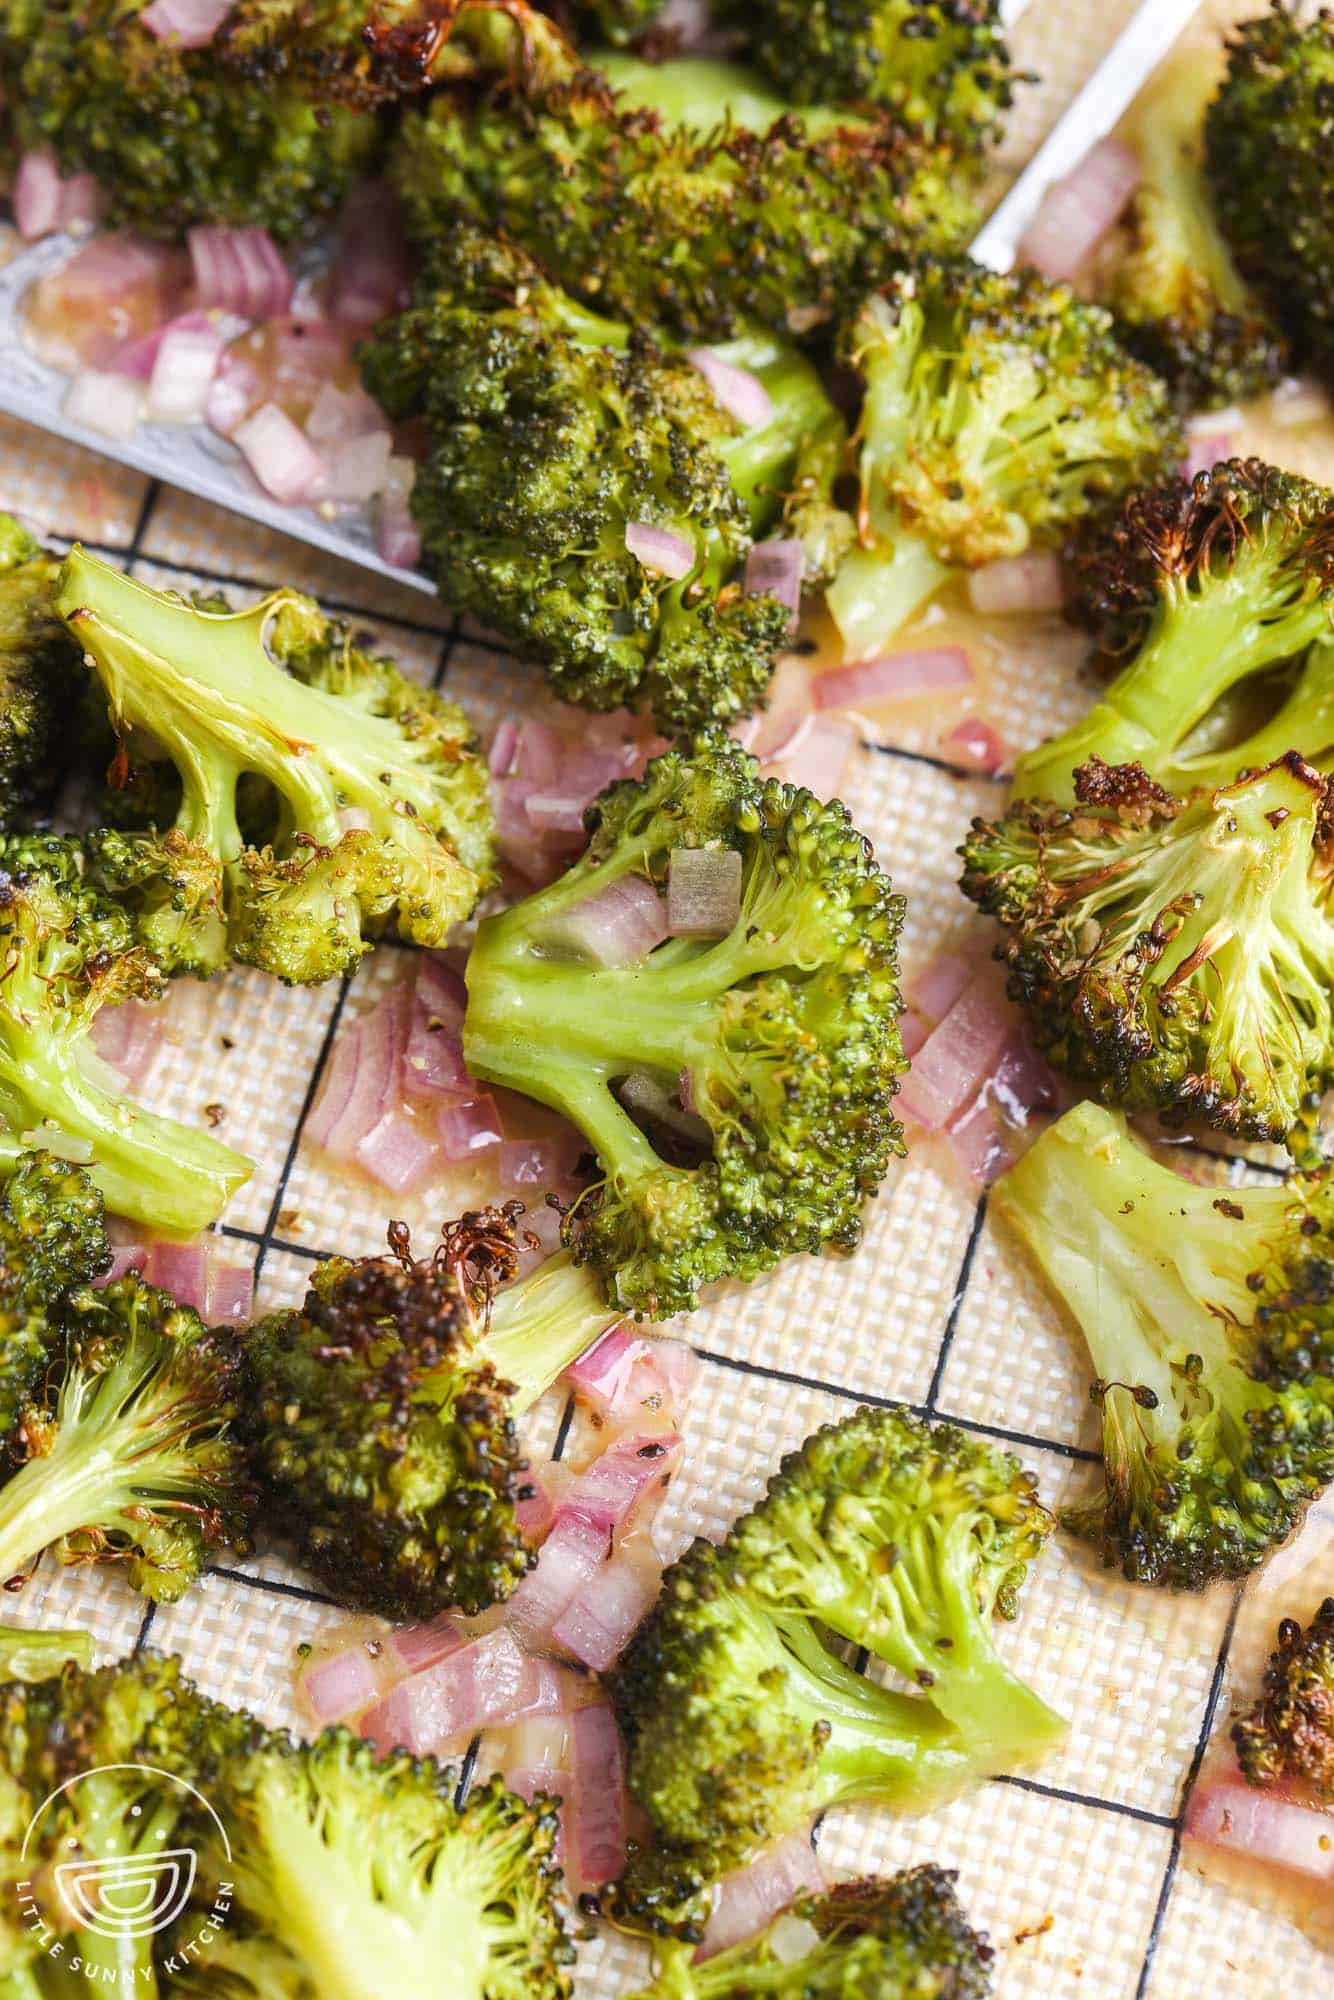 Roasted broccoli on a sheet pan with silicone mat, and some shallots shown from the vinaigrette